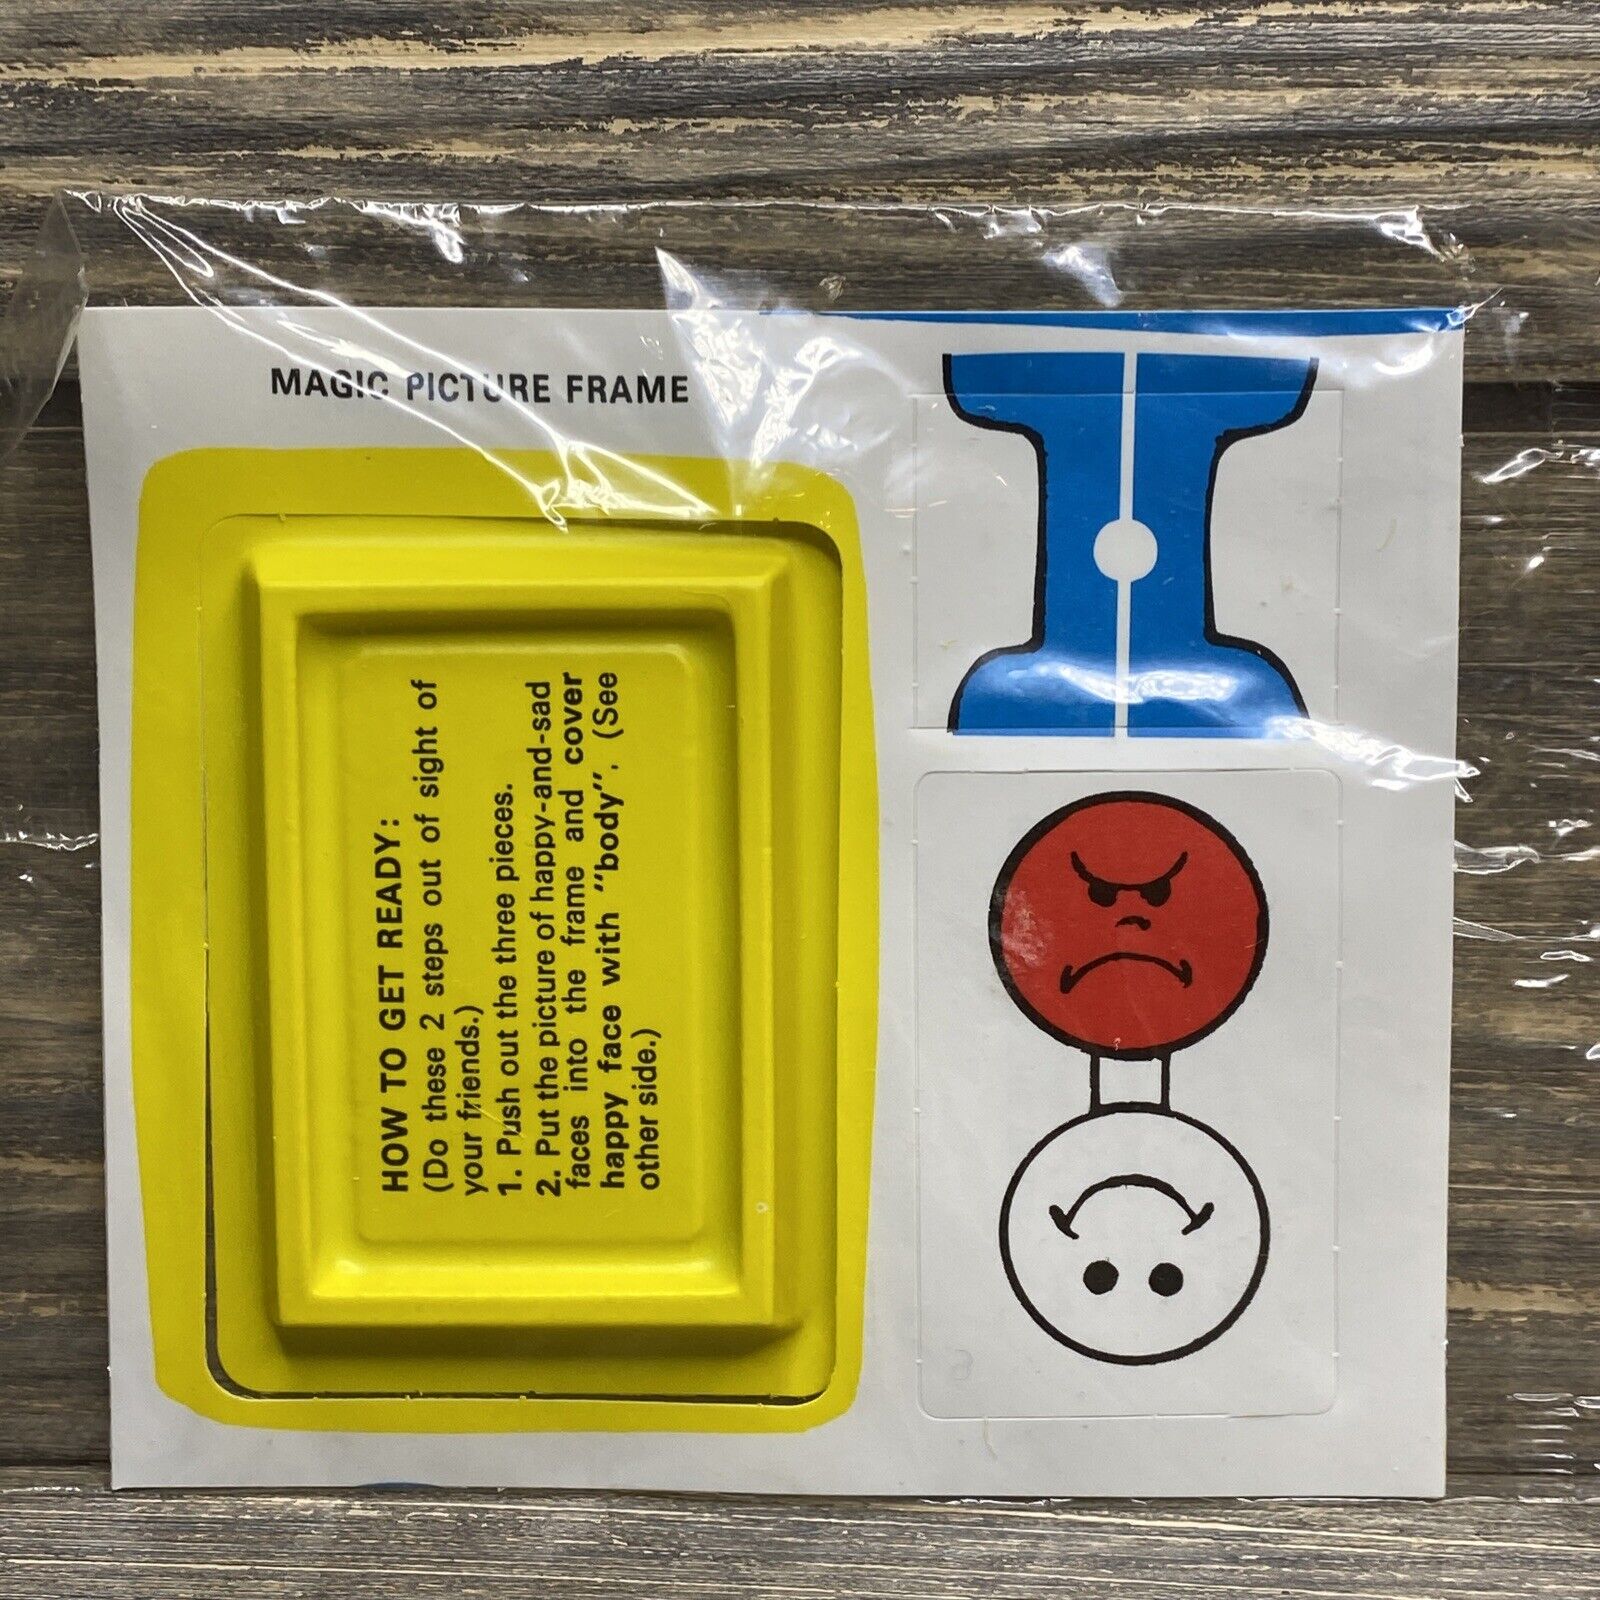 Vintage Magic Picture Frame Magic Trick Sad Happy Face Yellow Tray 